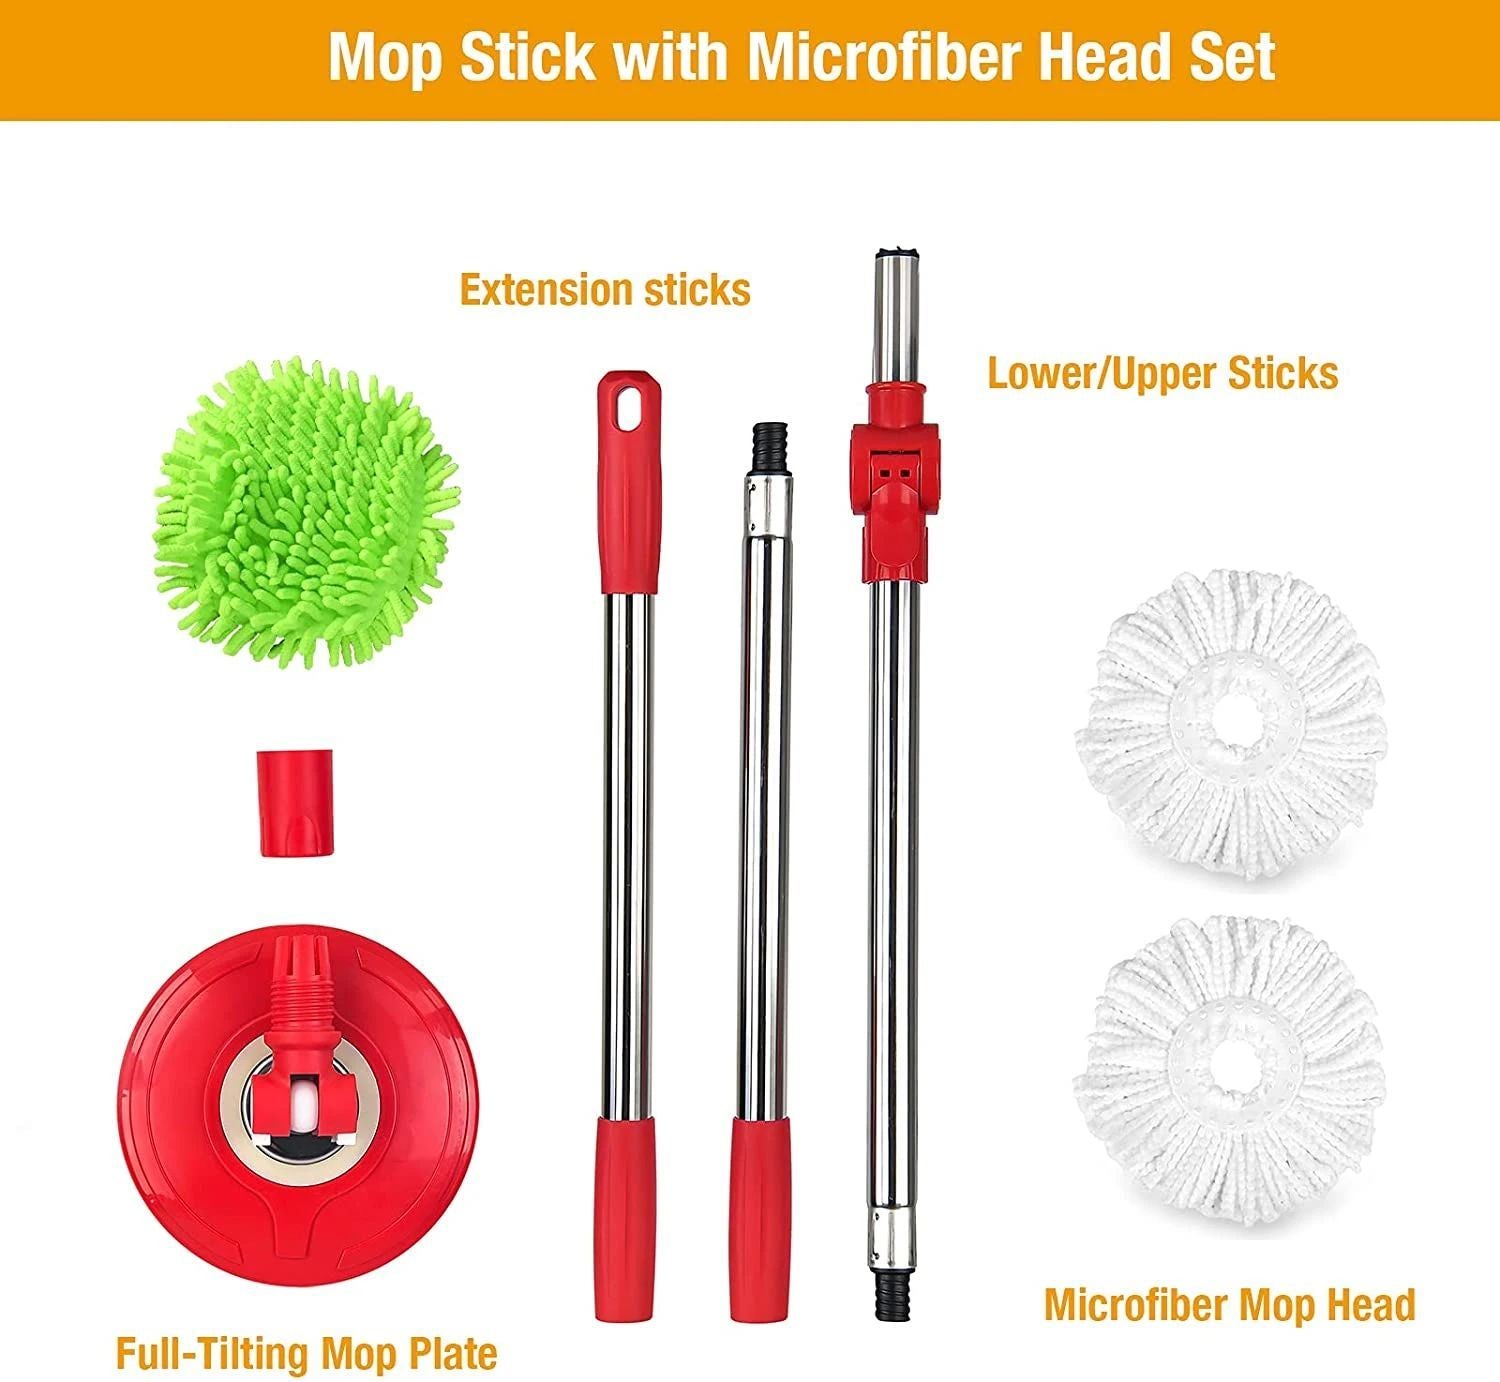 Spin Mop and Bucket with Wringer Set - for Home Kitchen Floor Cleaning - Wet/Dry Usage on Hardwood &amp; Tile - Upgraded Self-Balanced Easy Press System with 2 Washable Microfiber Mops Heads